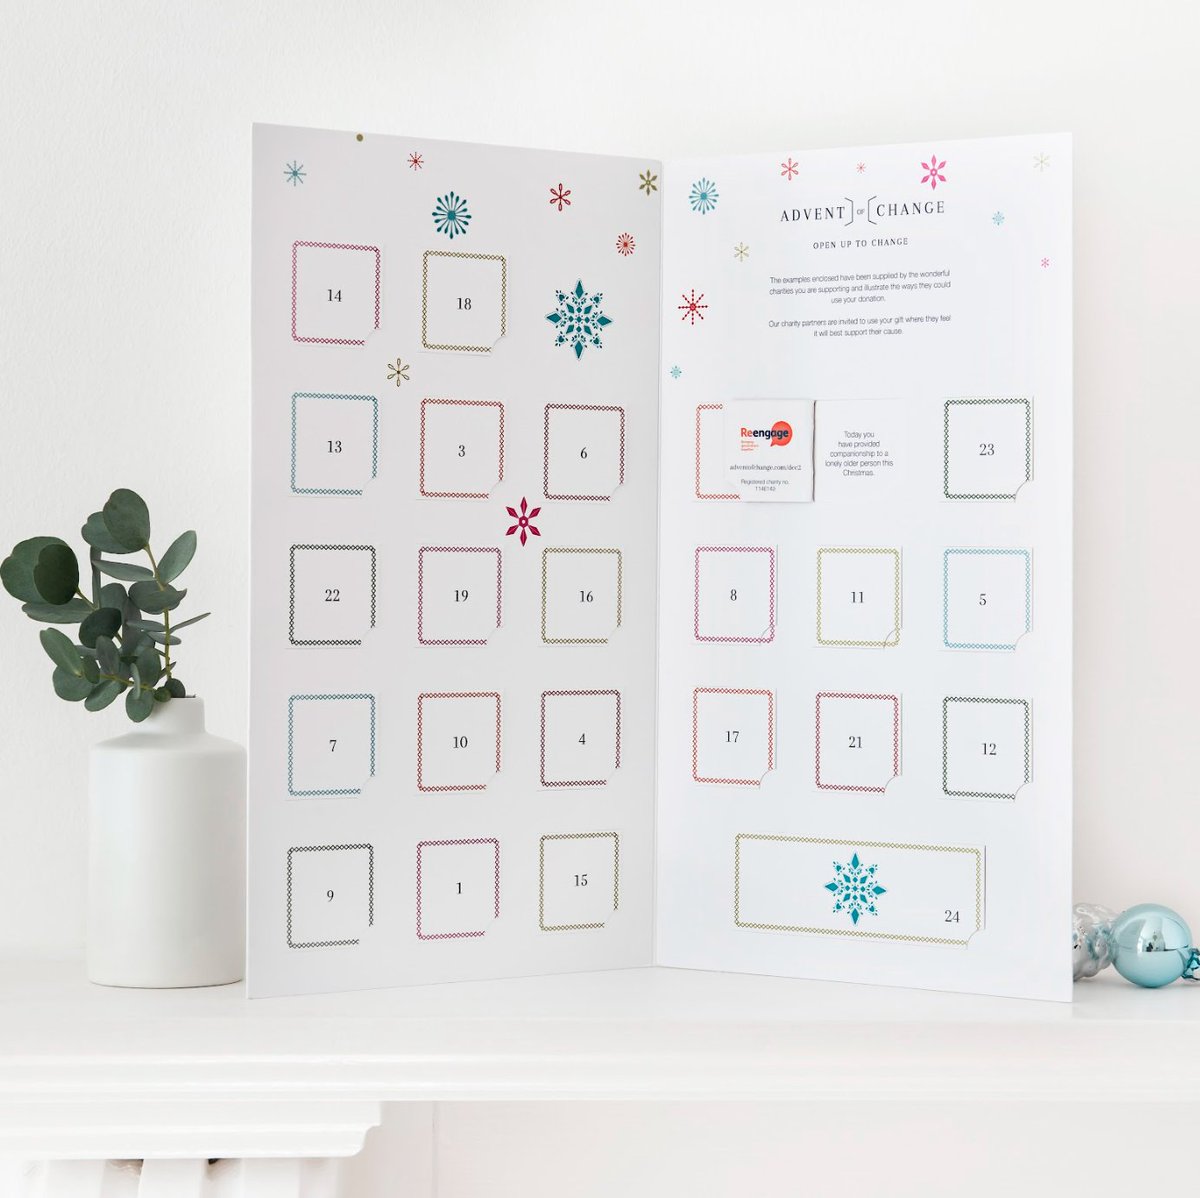 This year, we’re excited to be part of @adventofchange’s charity network! You can make a difference to Shout and 23 other fantastic causes by purchasing a charity advent calendar, candle or giftbook. Get yours here: adventofchange.com ❄️